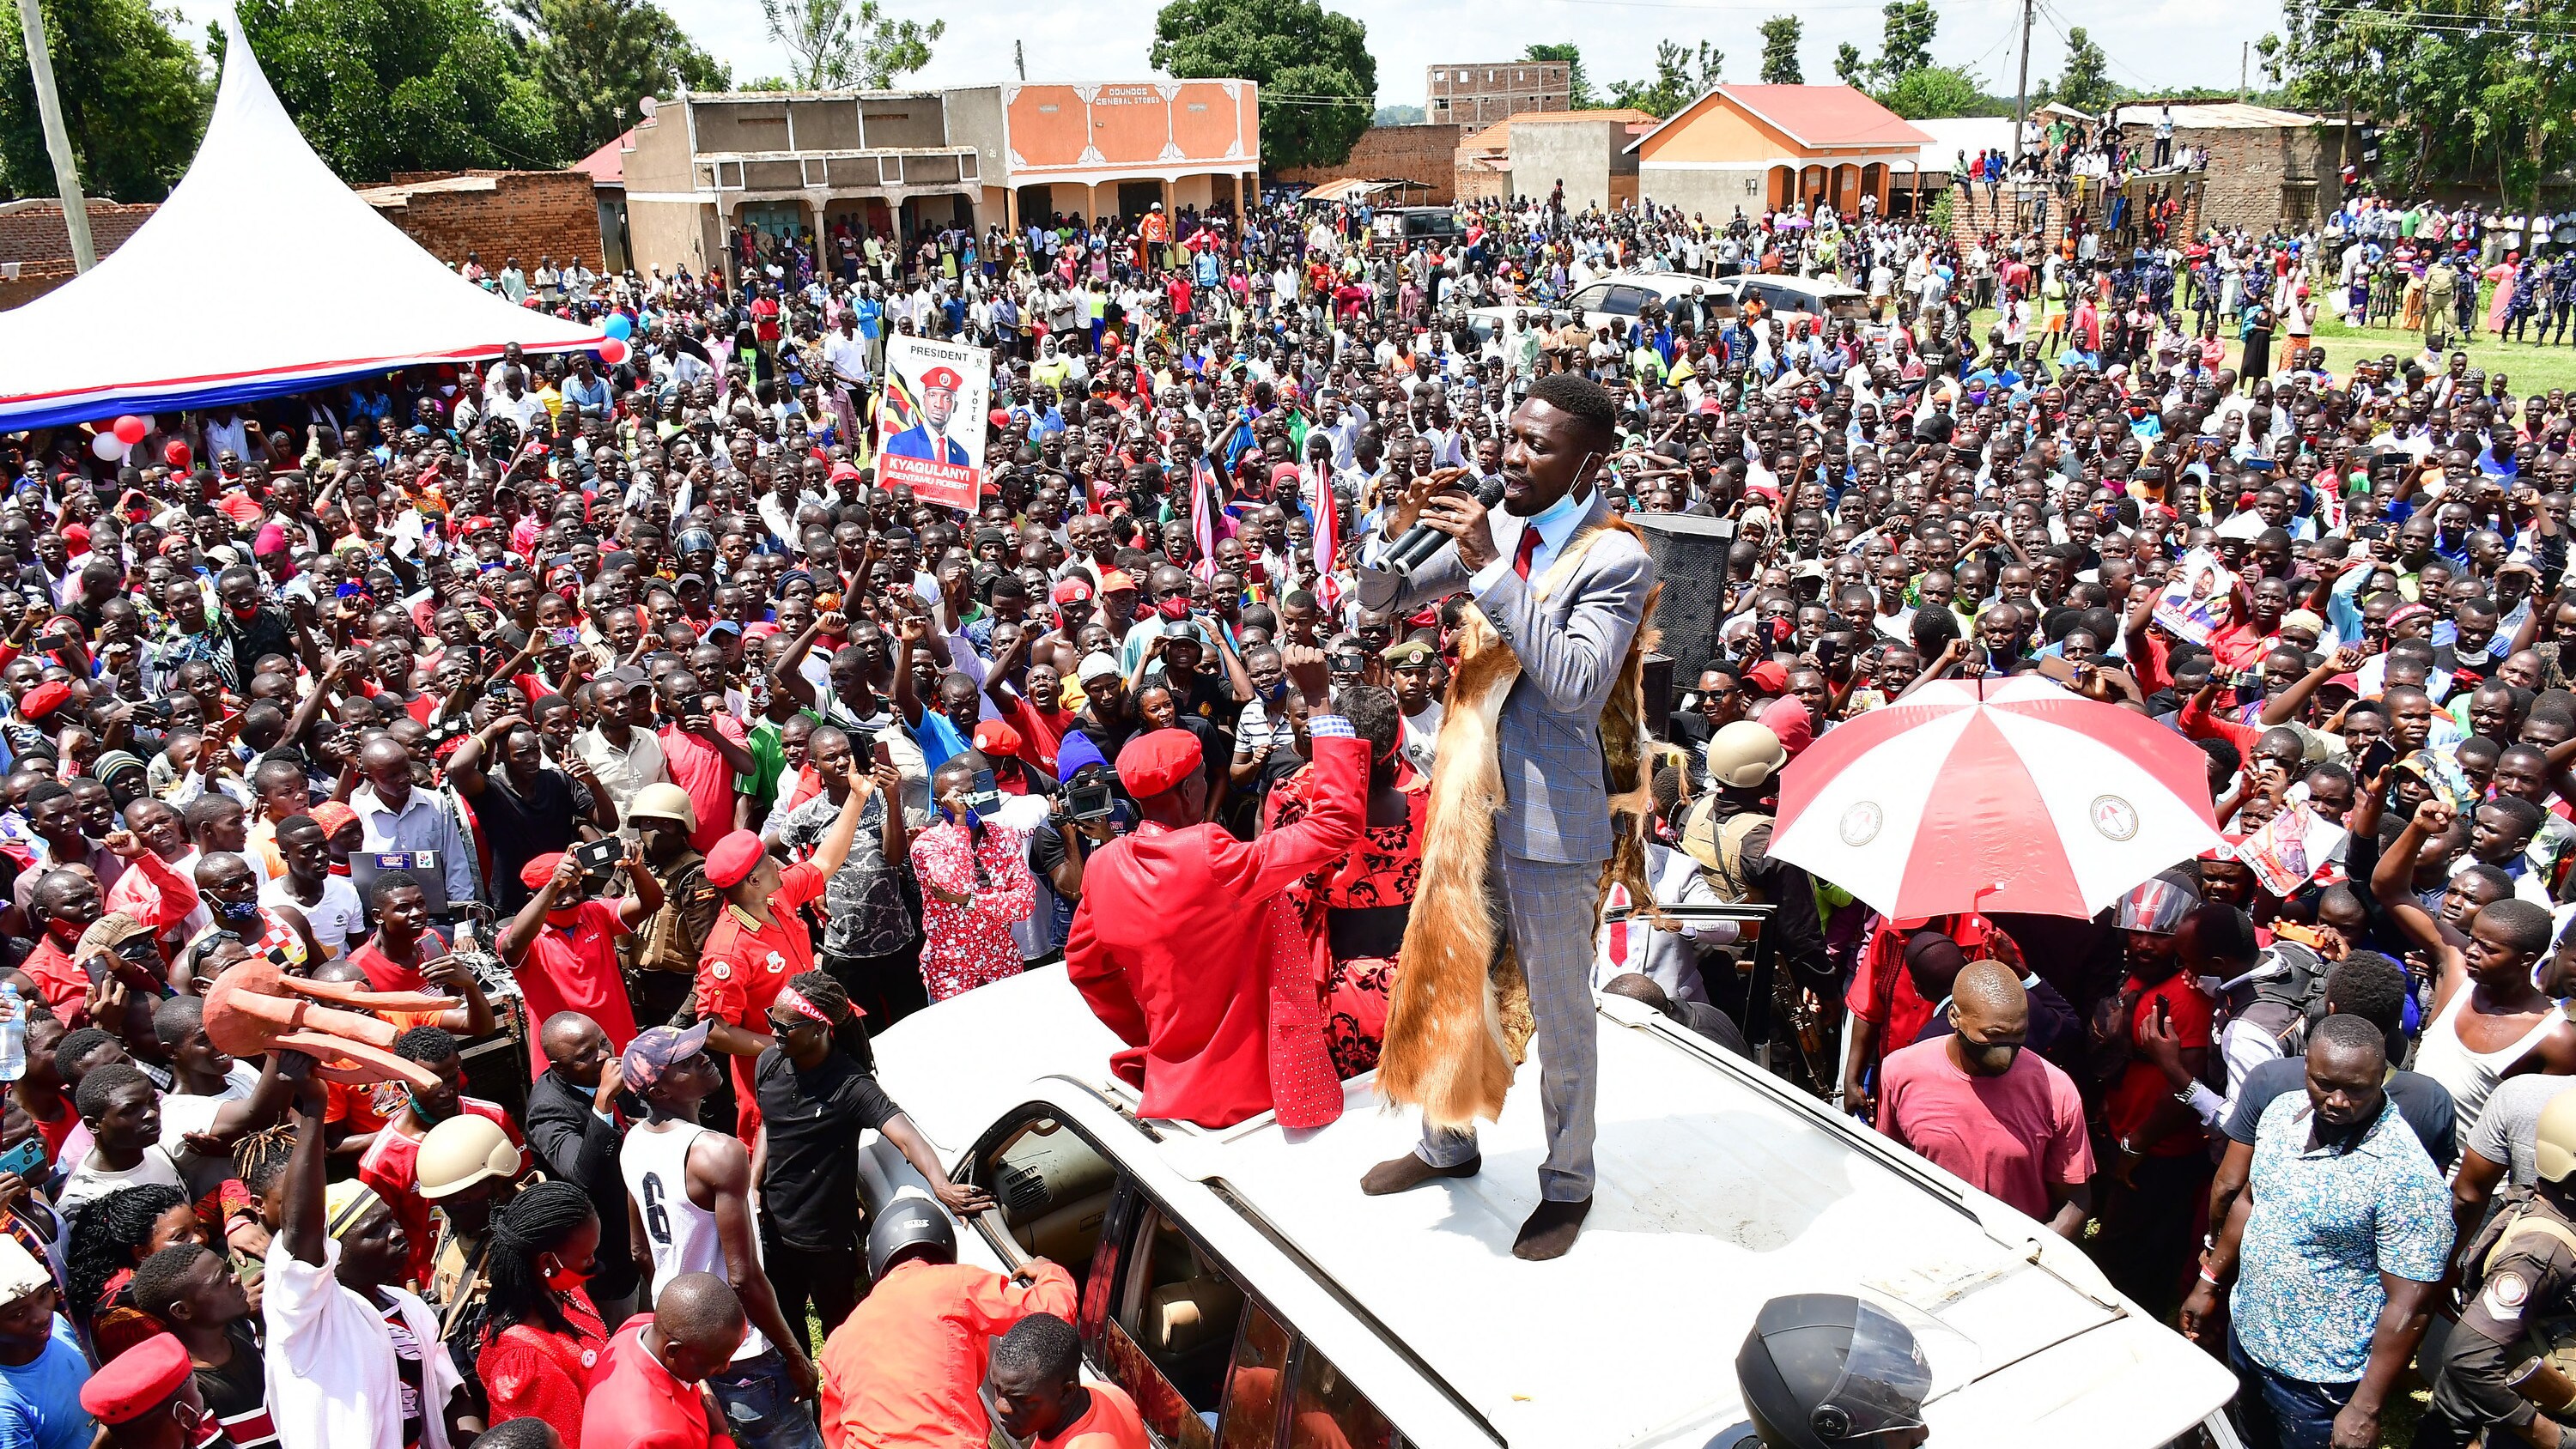 Robert Kyagulanyi Ssentamu (standing on roof of the vehicle), a candidate in Uganda's general elections in 2021 and widely regarded as the closest challenger to incumbent Yoweri Museveni, campaigns in Butaleja district in the country's East on November 17, 2020. (photo credit: Lookman Kampala)